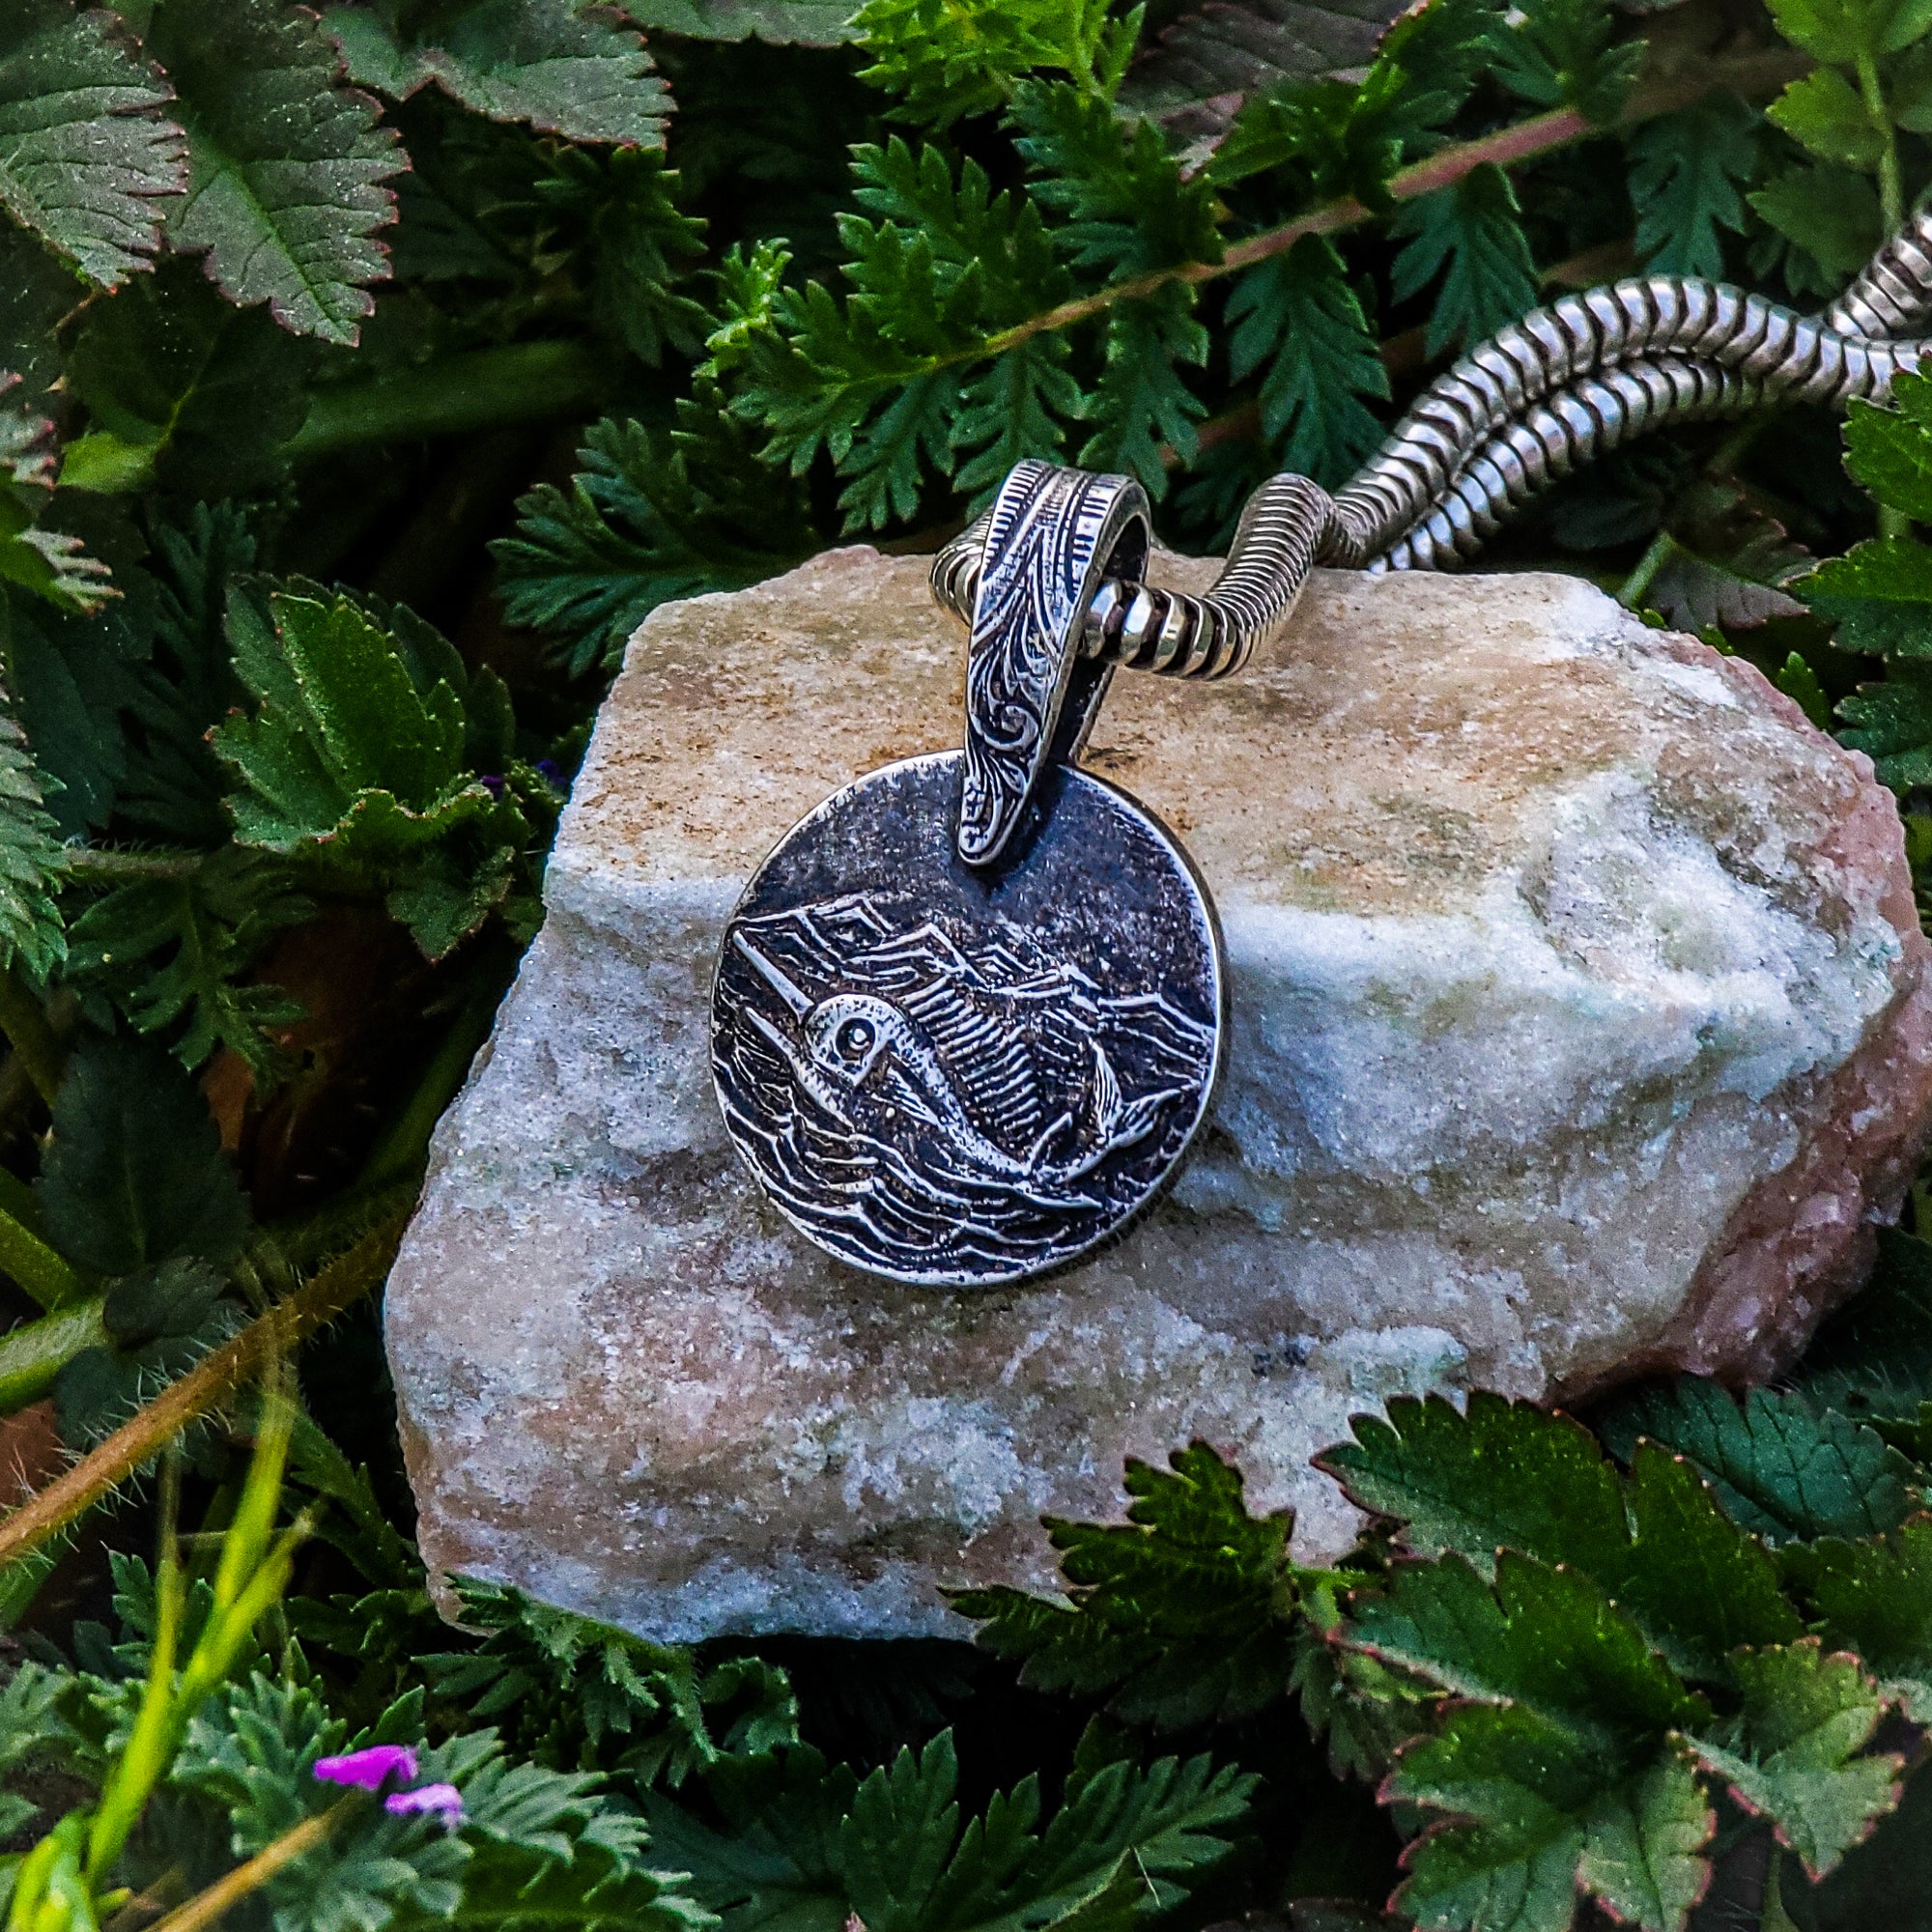 This photo showcases our stunning handmade solid sterling silver Swordfish in Silver Seas pendant. The pendant features a swordfish swimming in the ocean under a stormy sky. The pendant is resting on a beige rock and surrounded by lush green foliage.